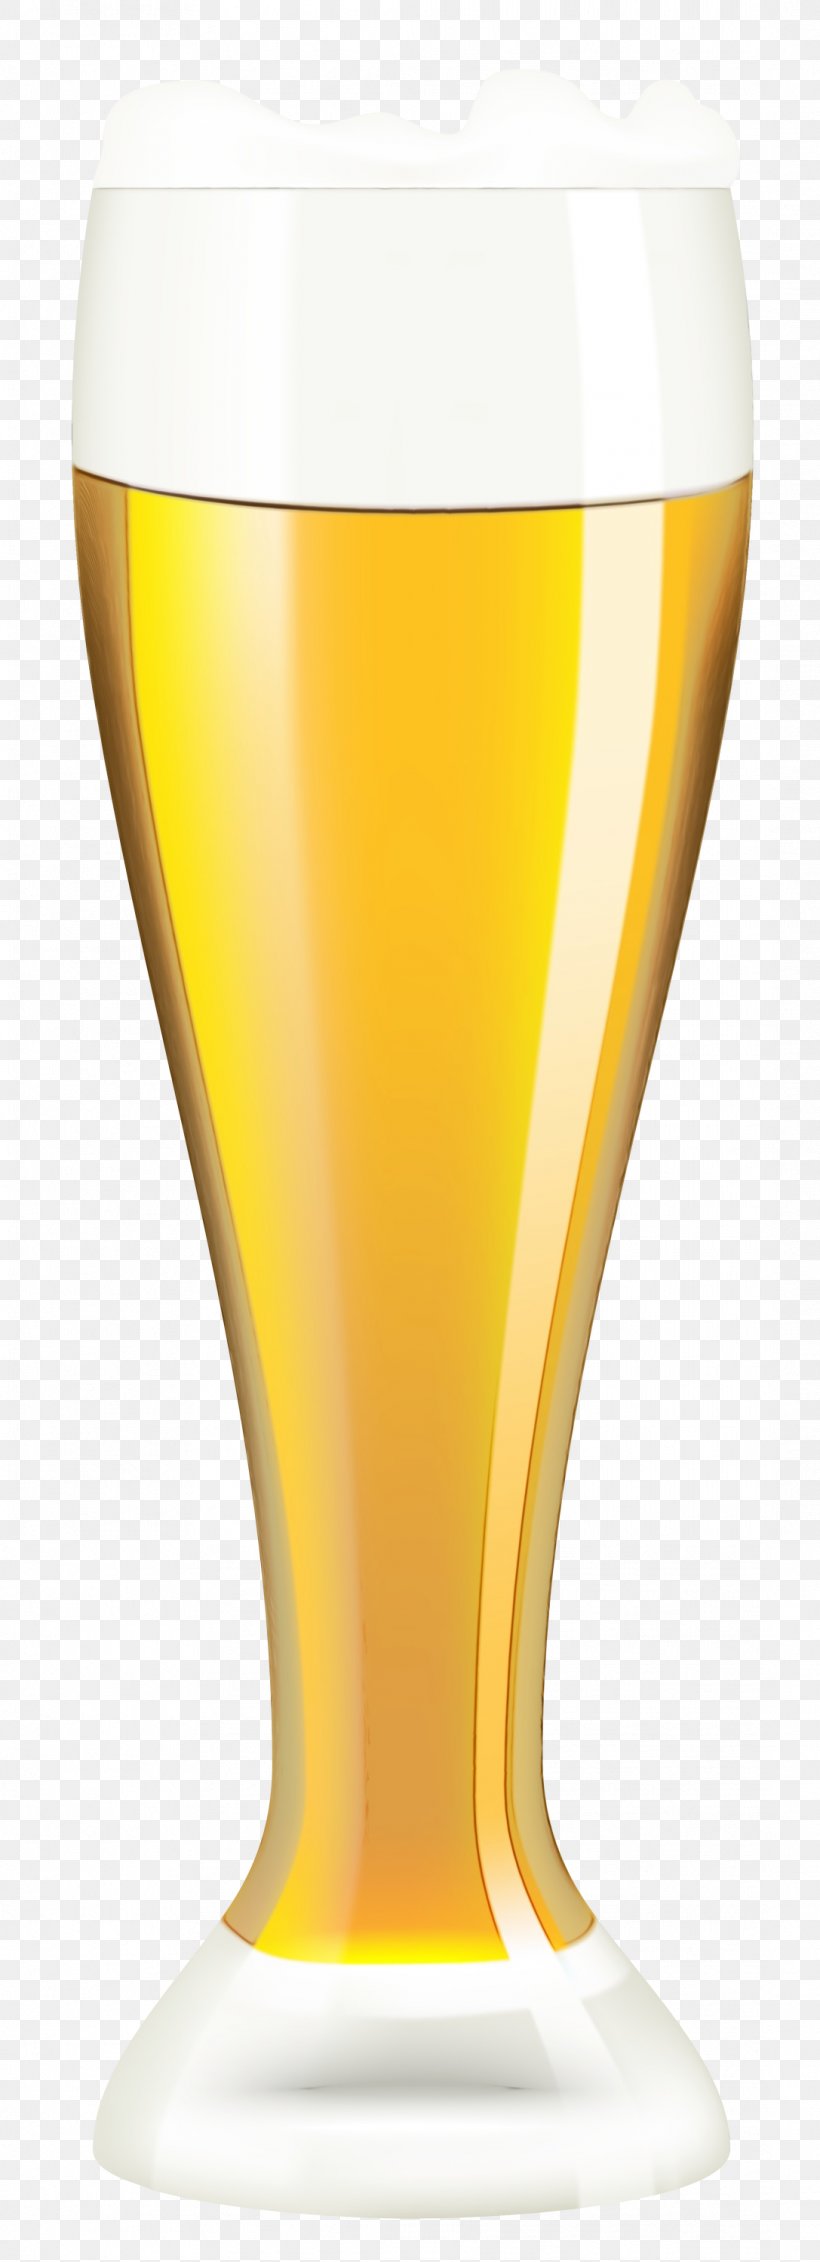 Yellow Beer Glass Champagne Cocktail Drinkware Champagne Stemware, PNG, 1087x2999px, Watercolor, Beer Glass, Champagne Cocktail, Champagne Stemware, Drink Download Free